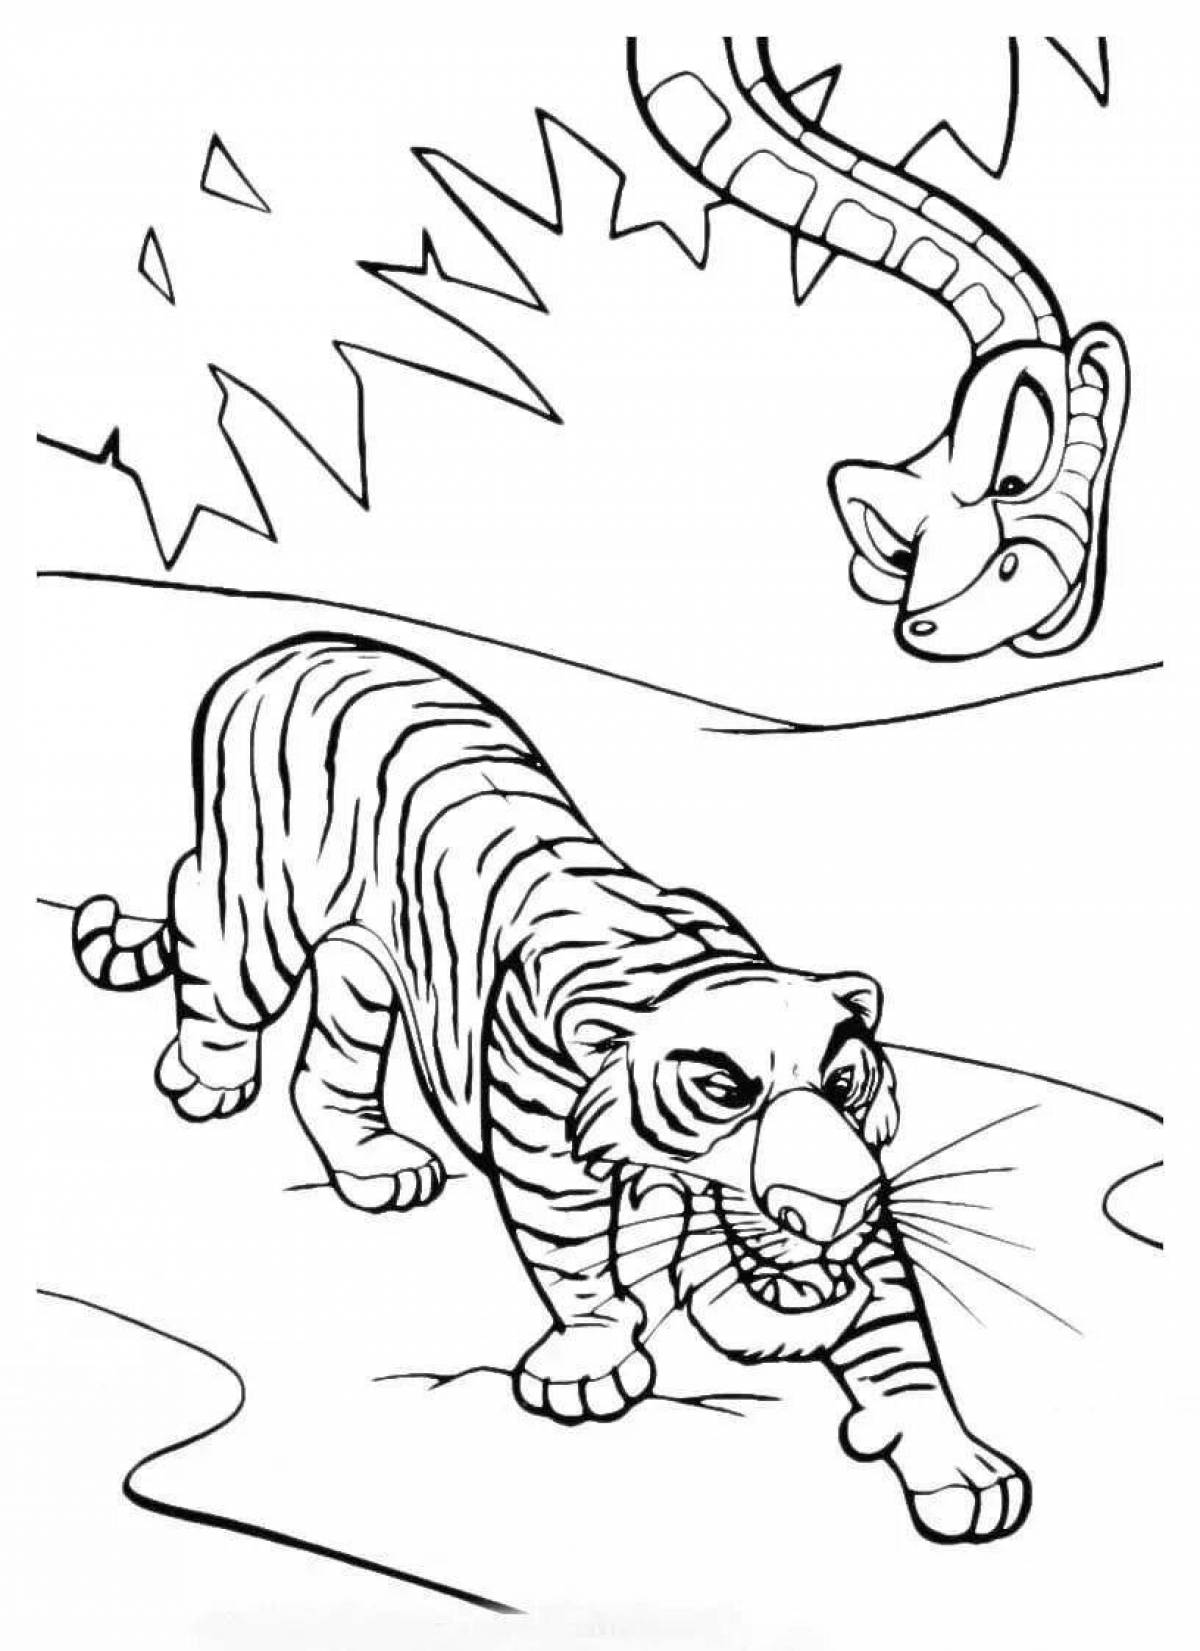 Greatly colored tiger sherkhan coloring book